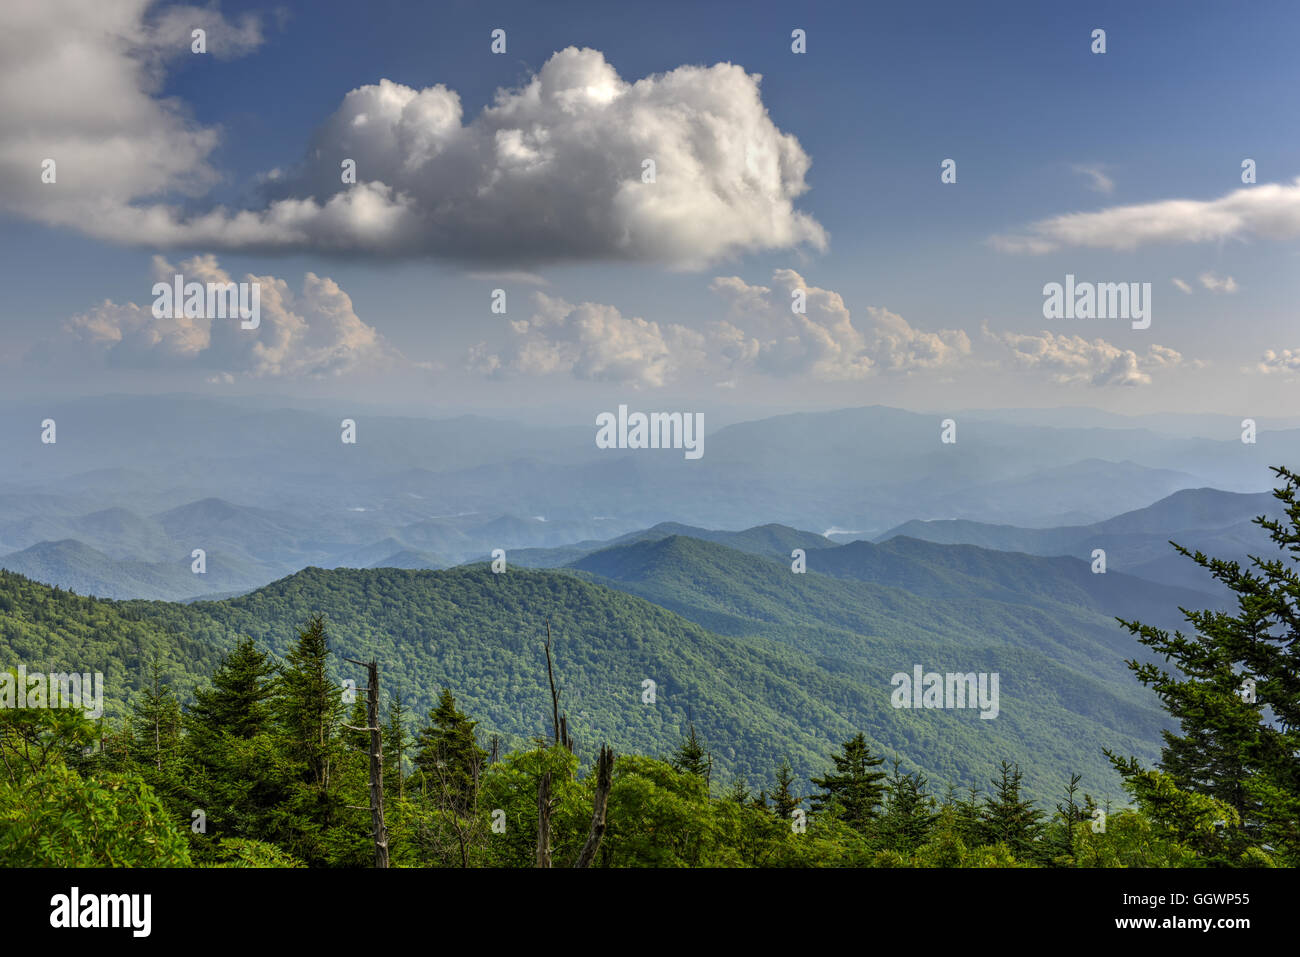 Ancient ridges in the Appalachian Mountains of Great Smoky Mountains National Park, NC, USA. Photo by Darrell Young. Stock Photo